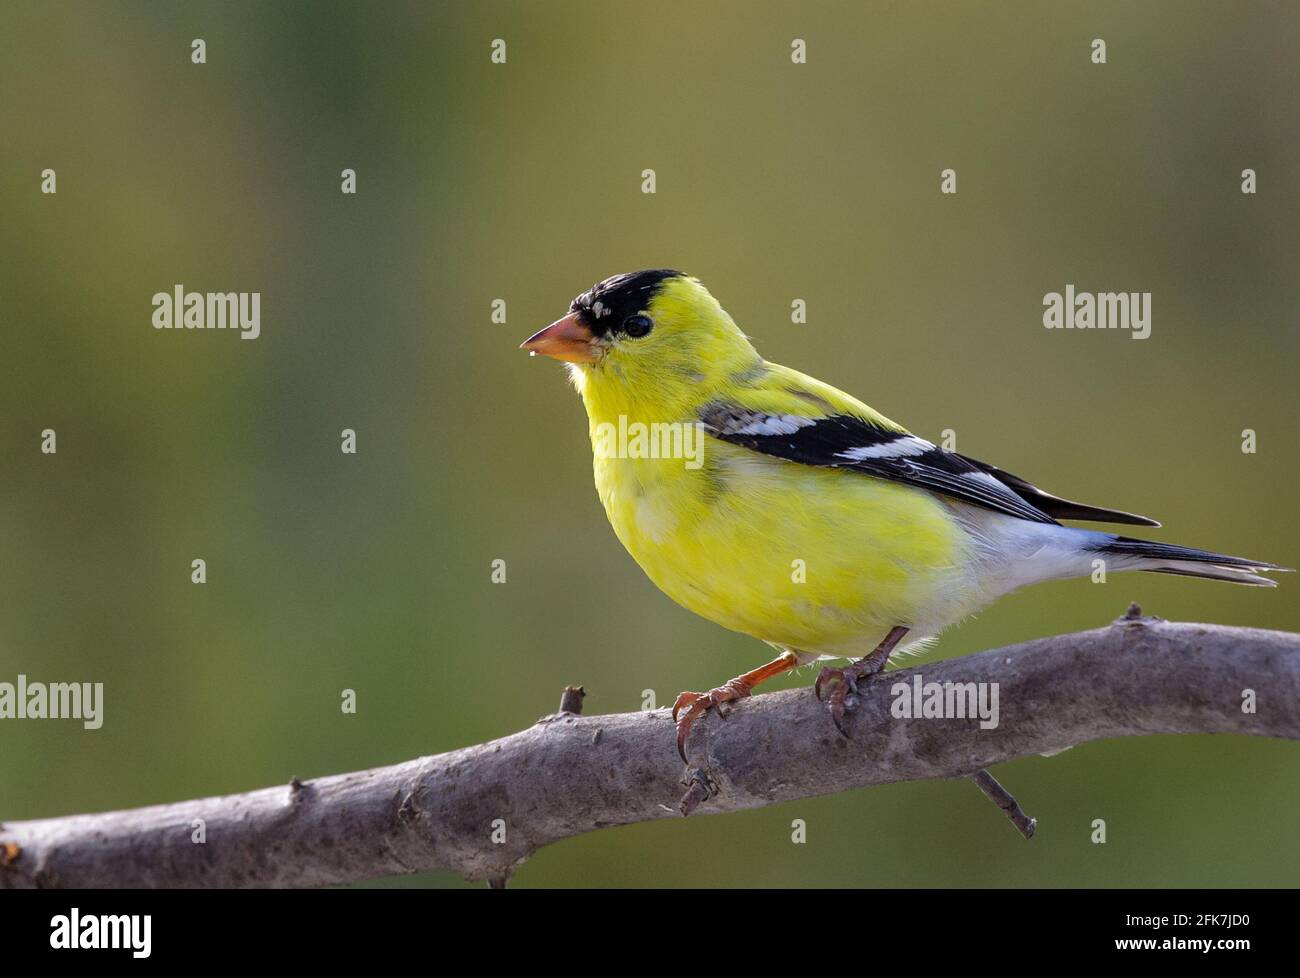 American goldfinch (Spinus tristis) - Hall County, Georgia. Male American goldfinch perching and enjoying the spring morning sunshine. Stock Photo